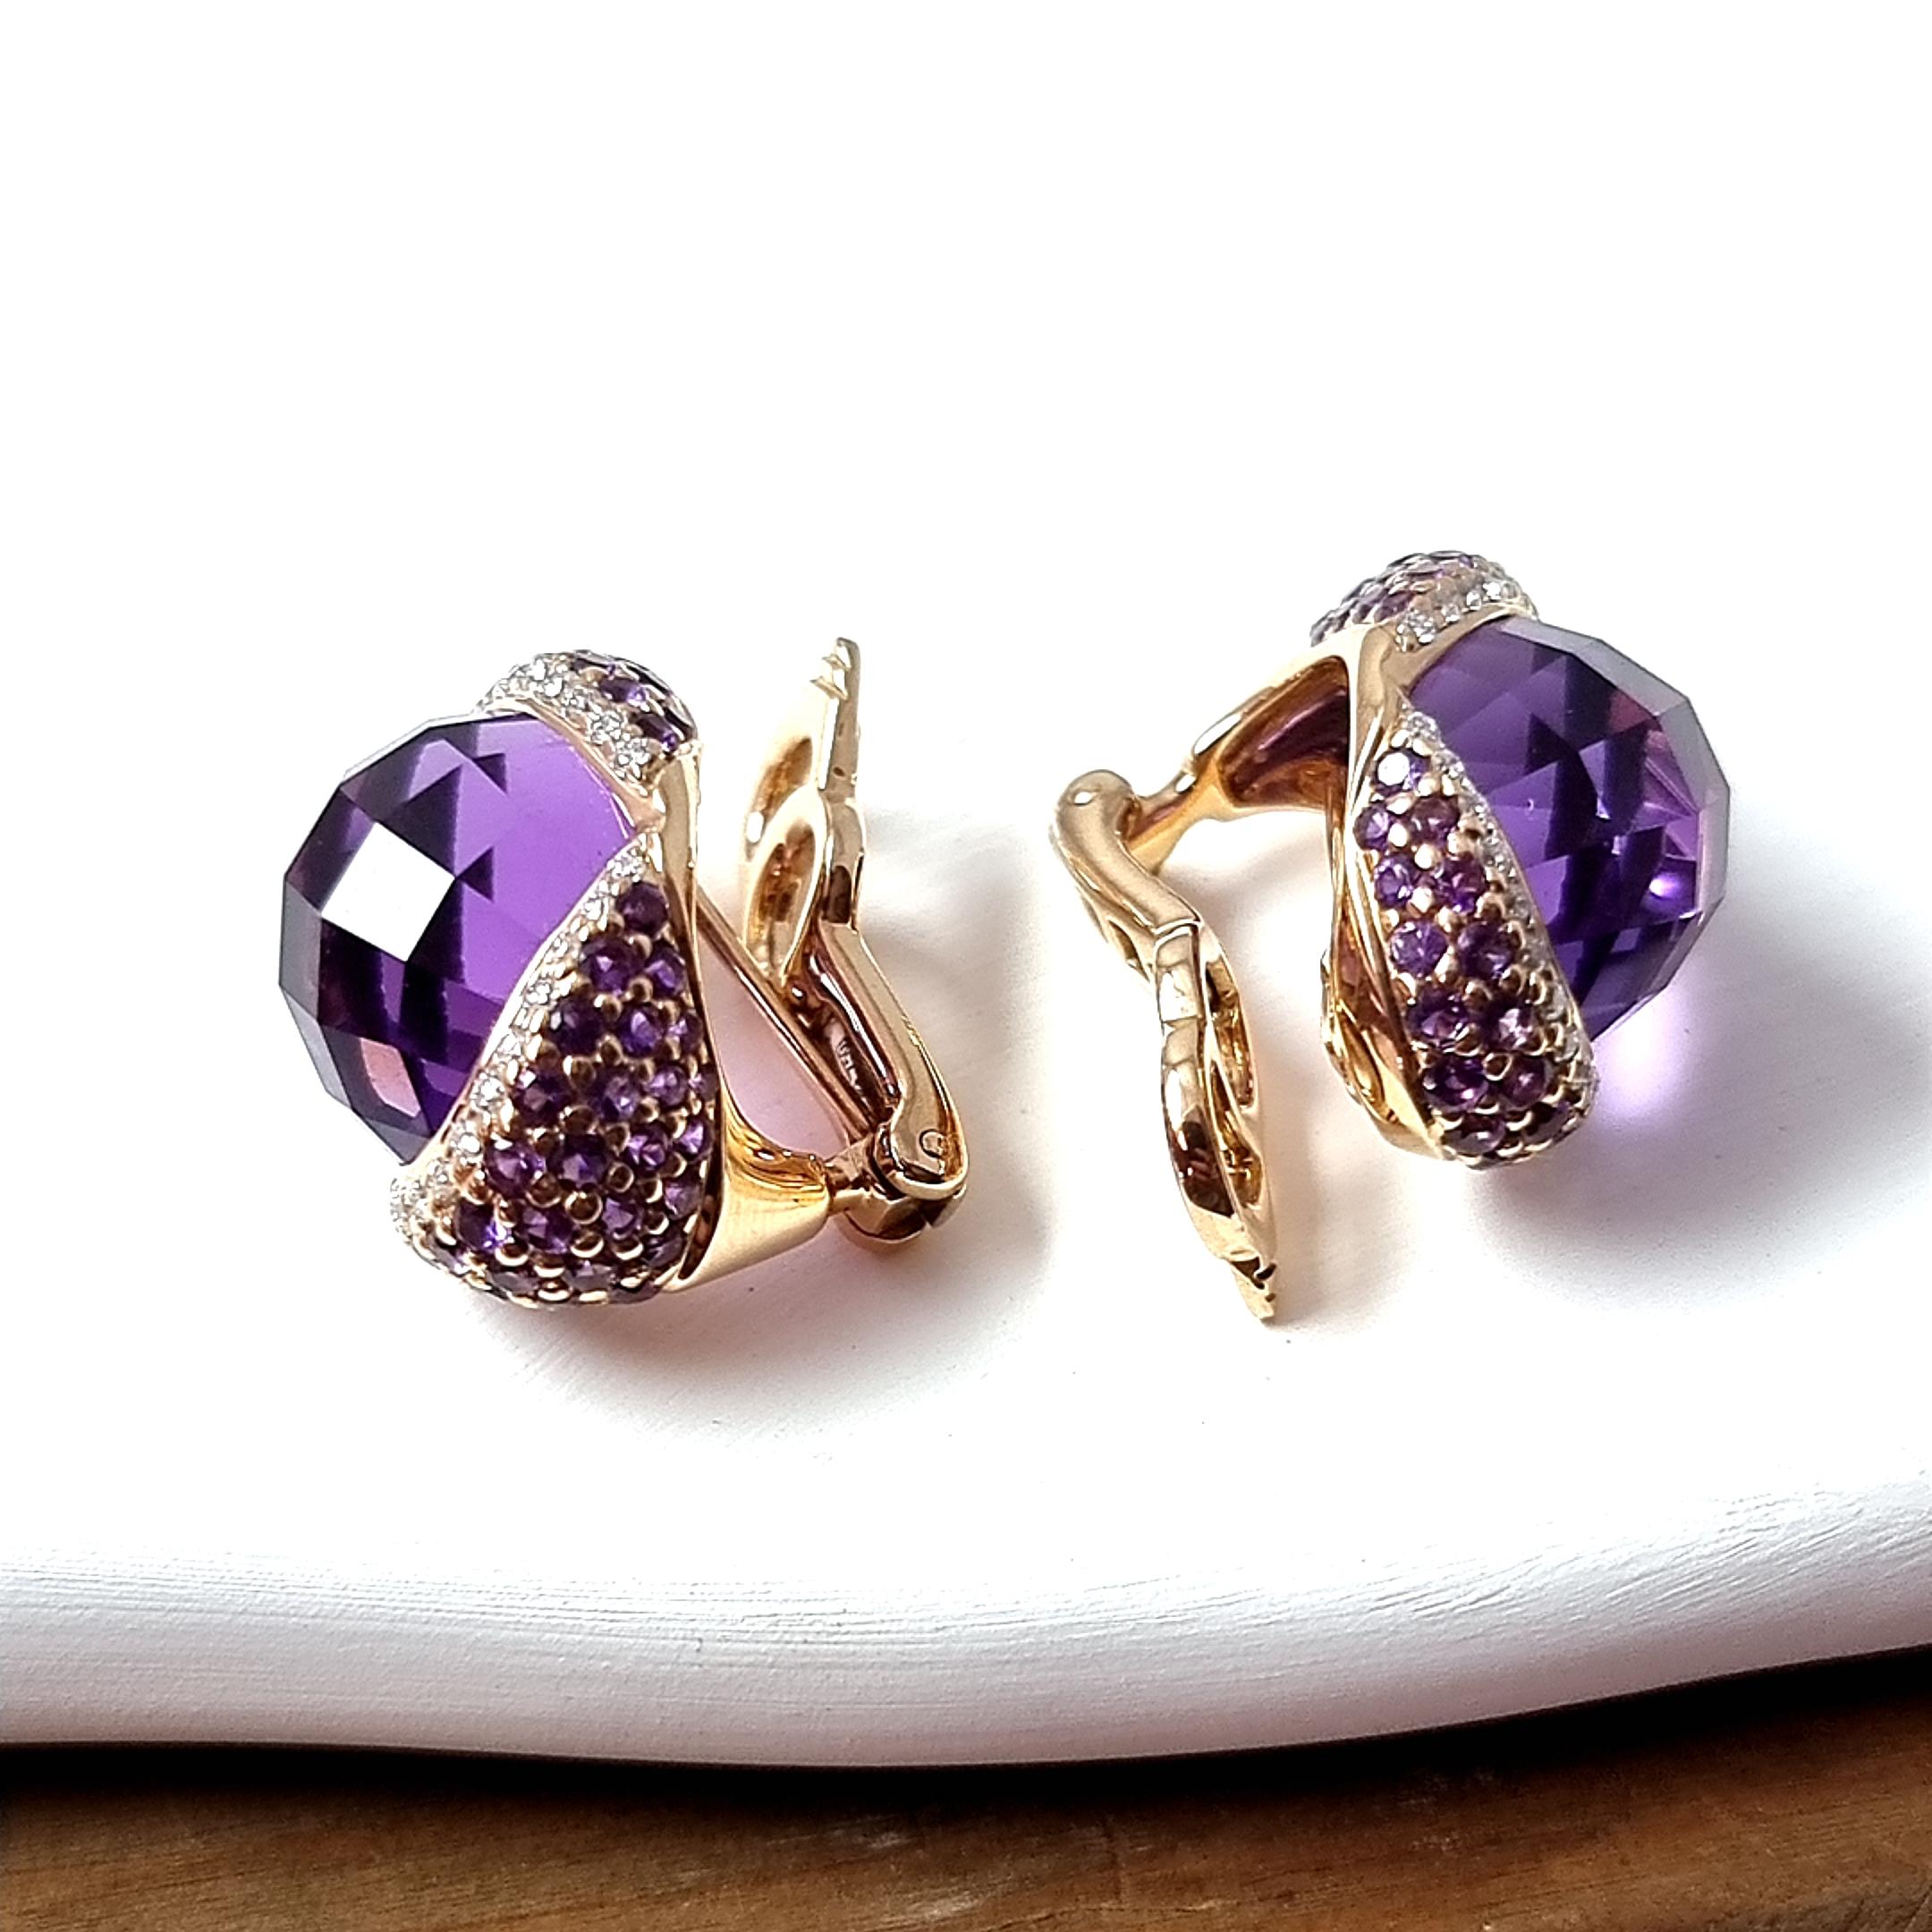 Women's 18K Yellow Gold Earrings with White Diamonds and Amethysts